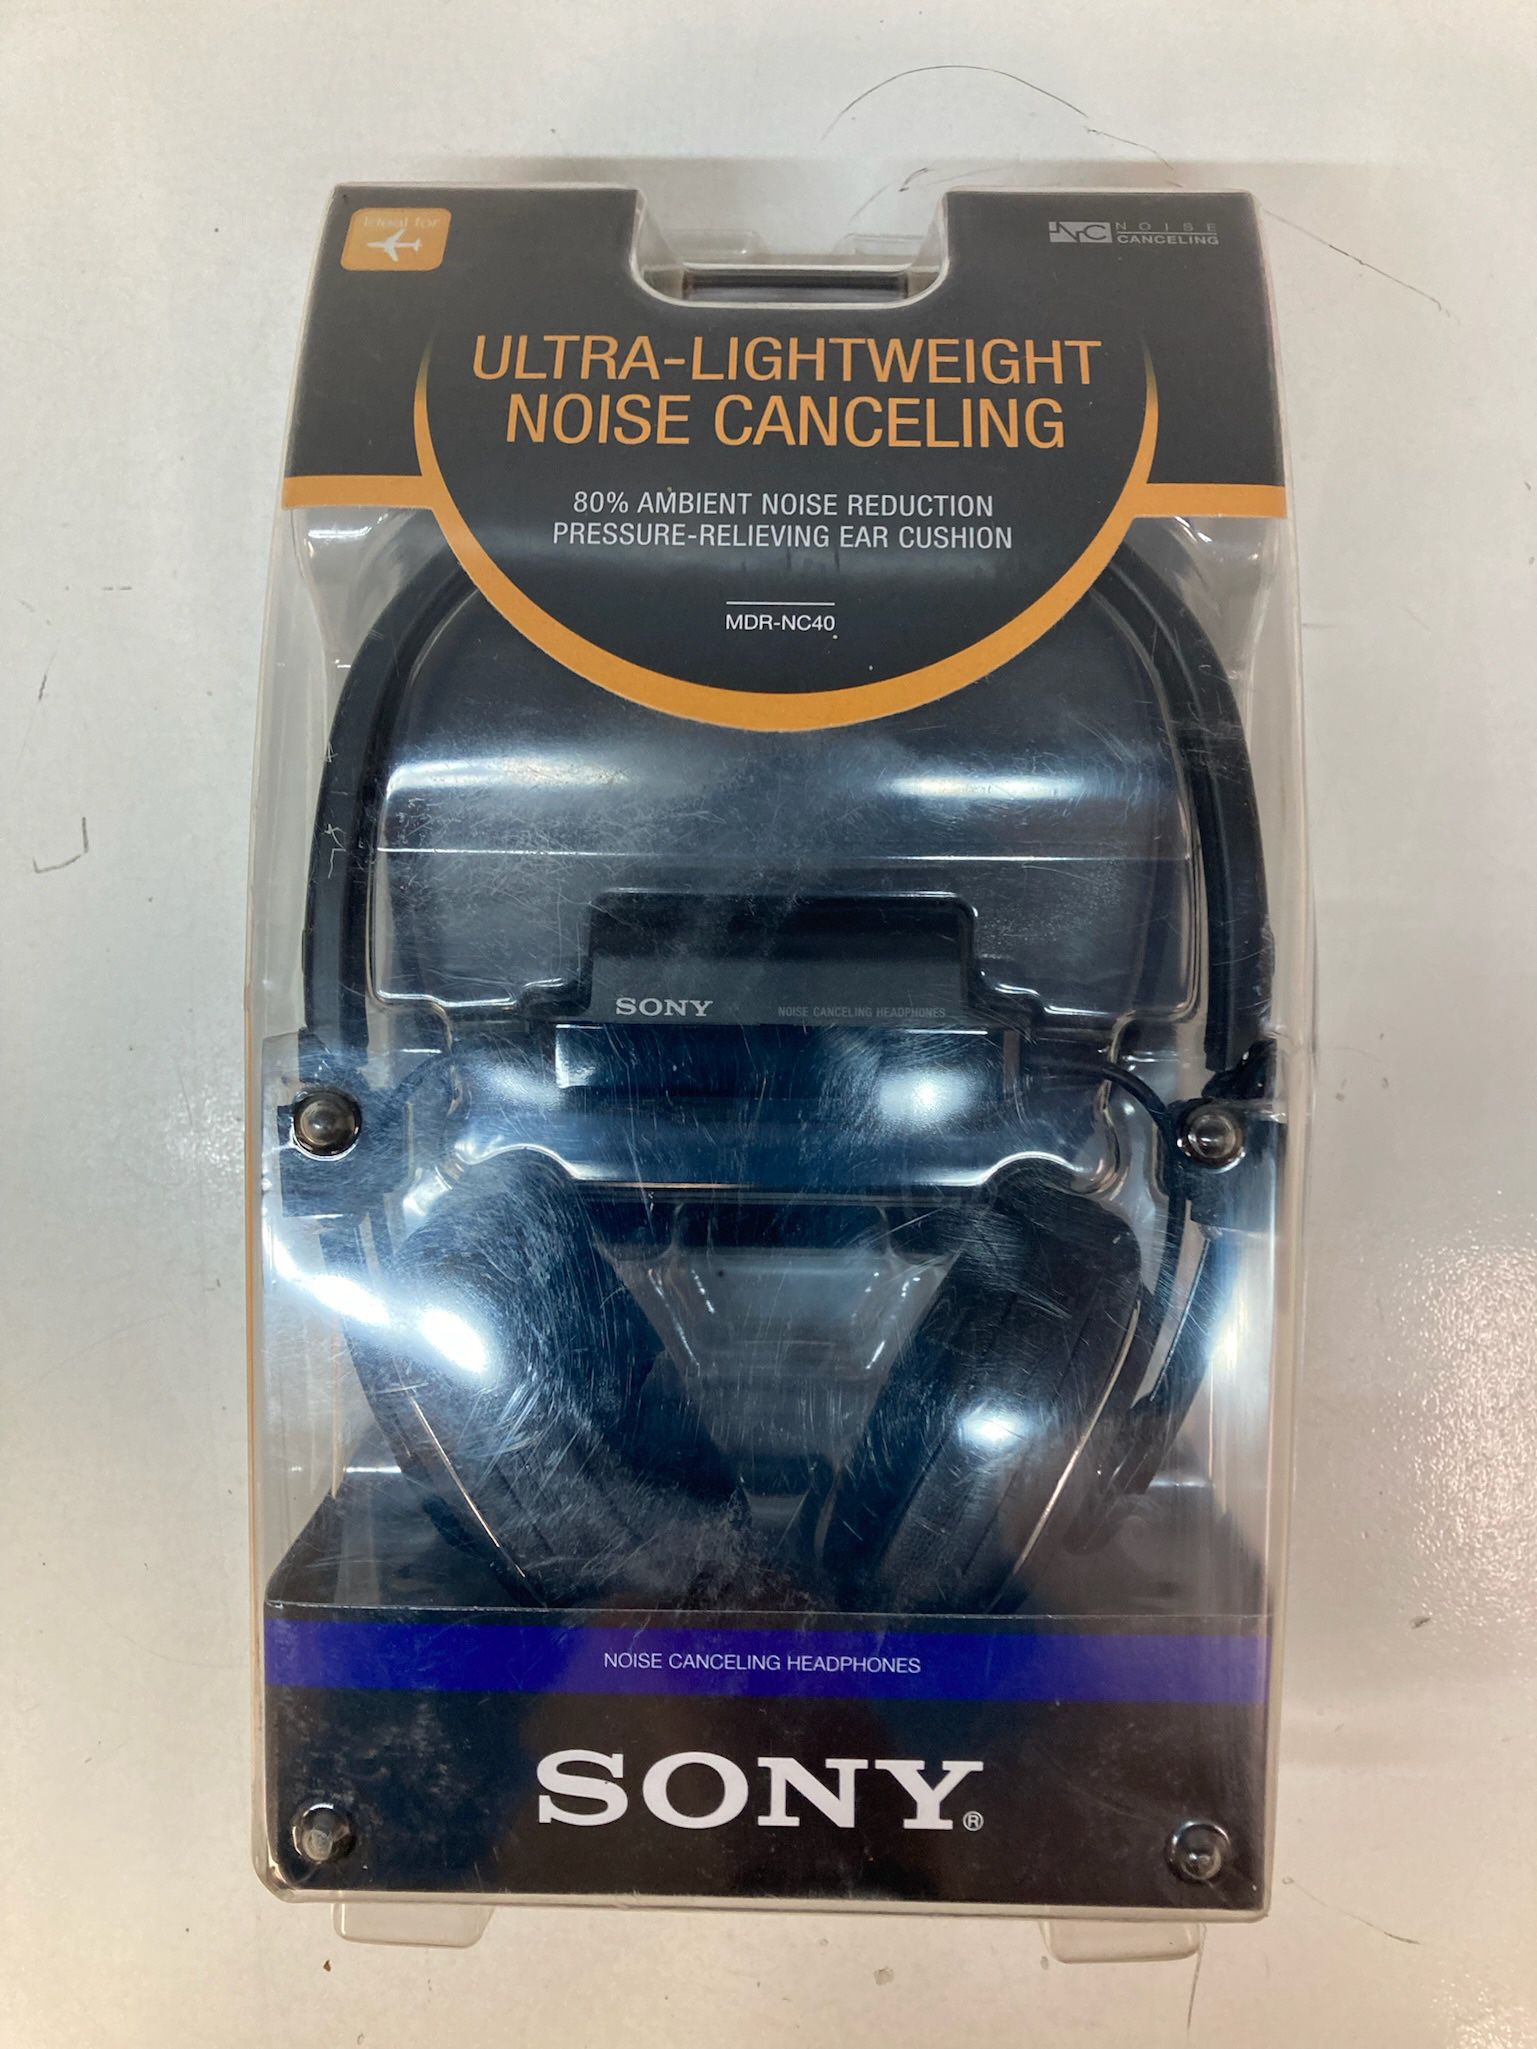 Sony MDR-NC40 Ultra Lightweight Noise Canceling Headphones